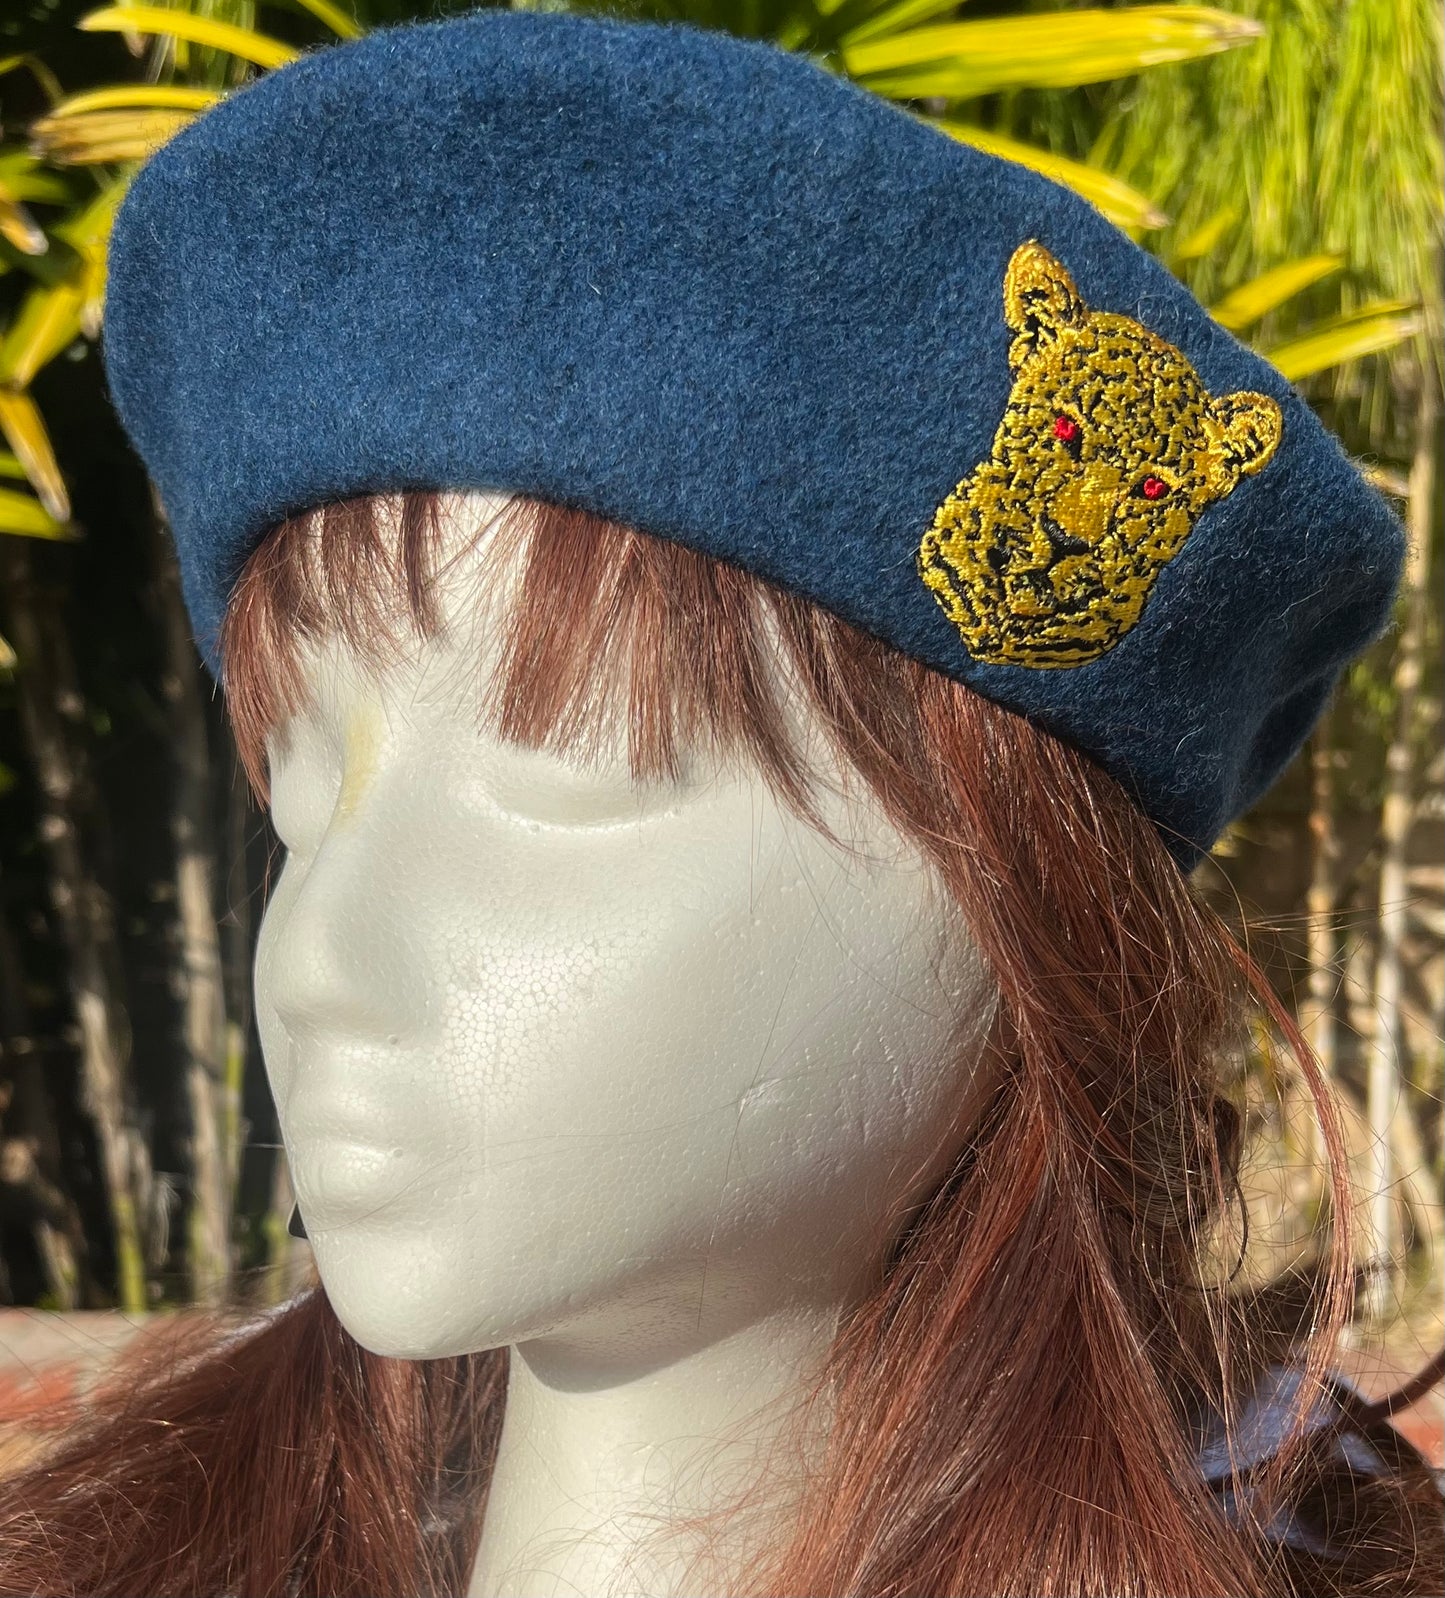 ROYAL FRENCH BERET EMBROIDERED LEPPARD CREST in TEAL BLUE